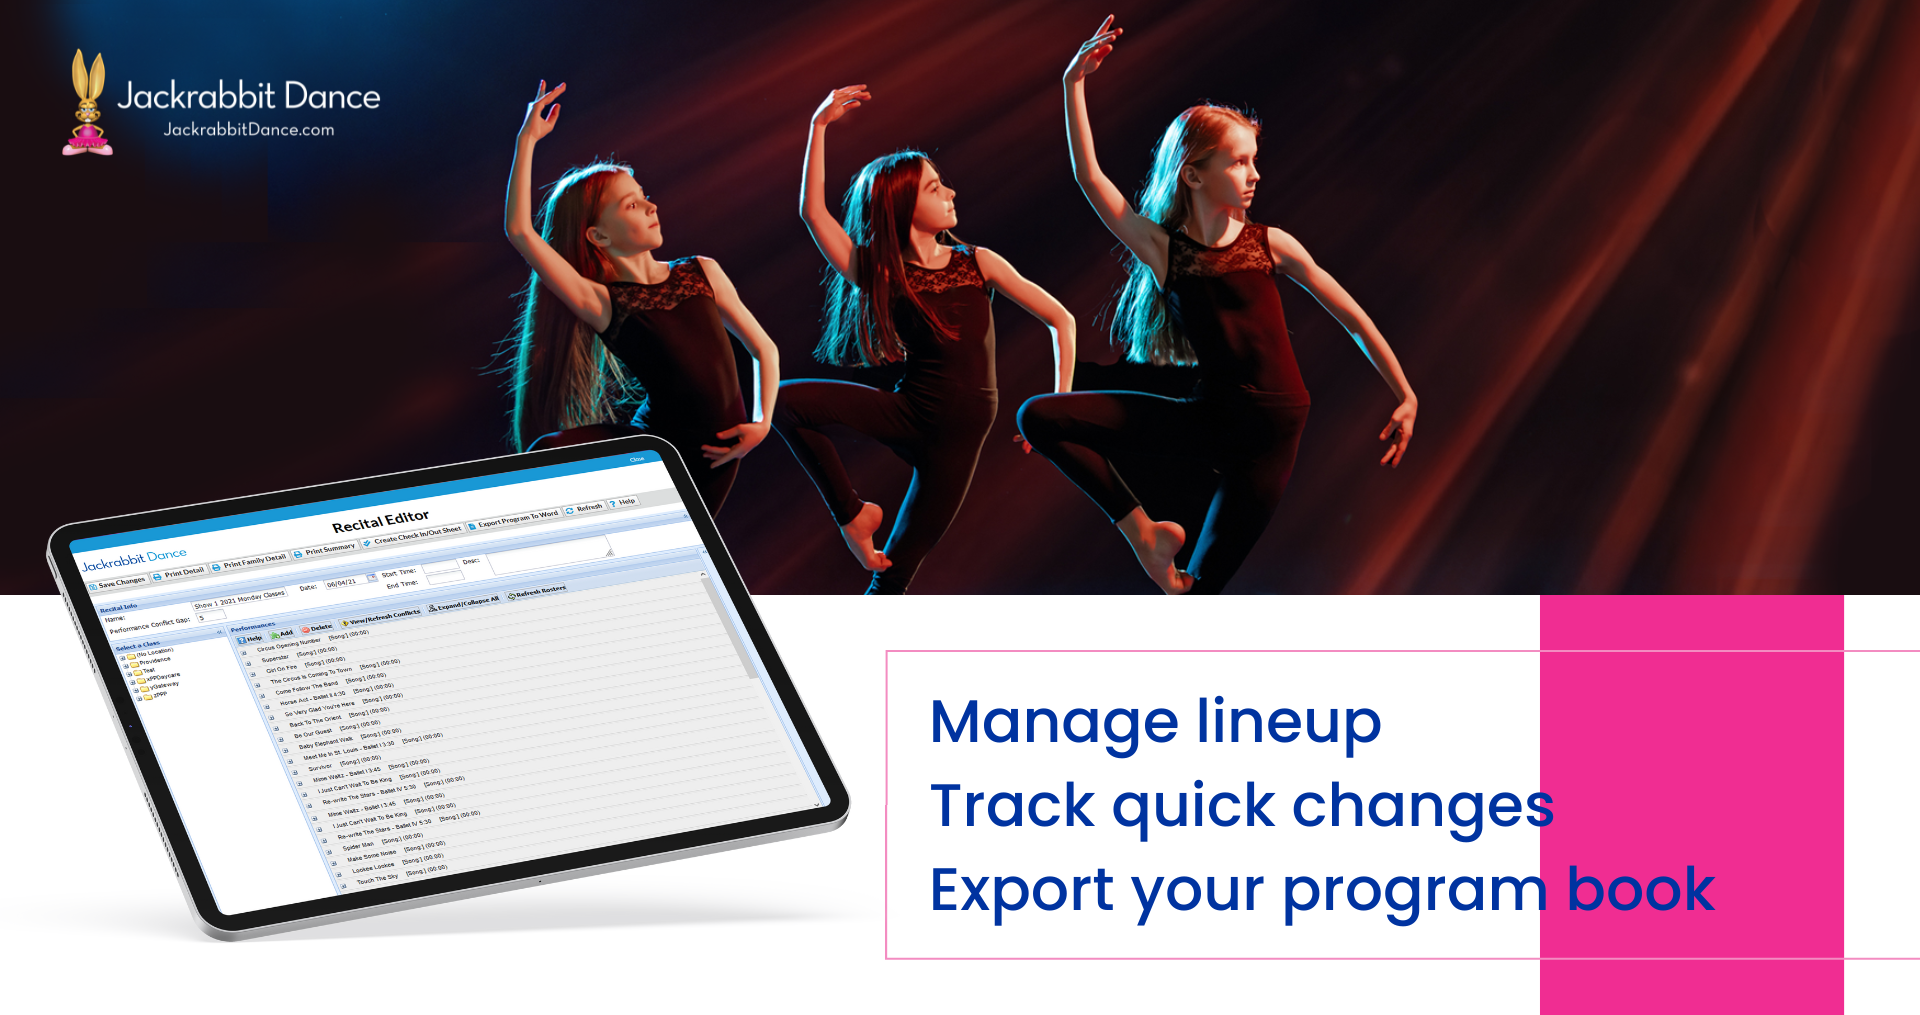 Using Jackrabbit Dance, you can plan your recital lineup, the music, check students in or out, create a program book, and more!